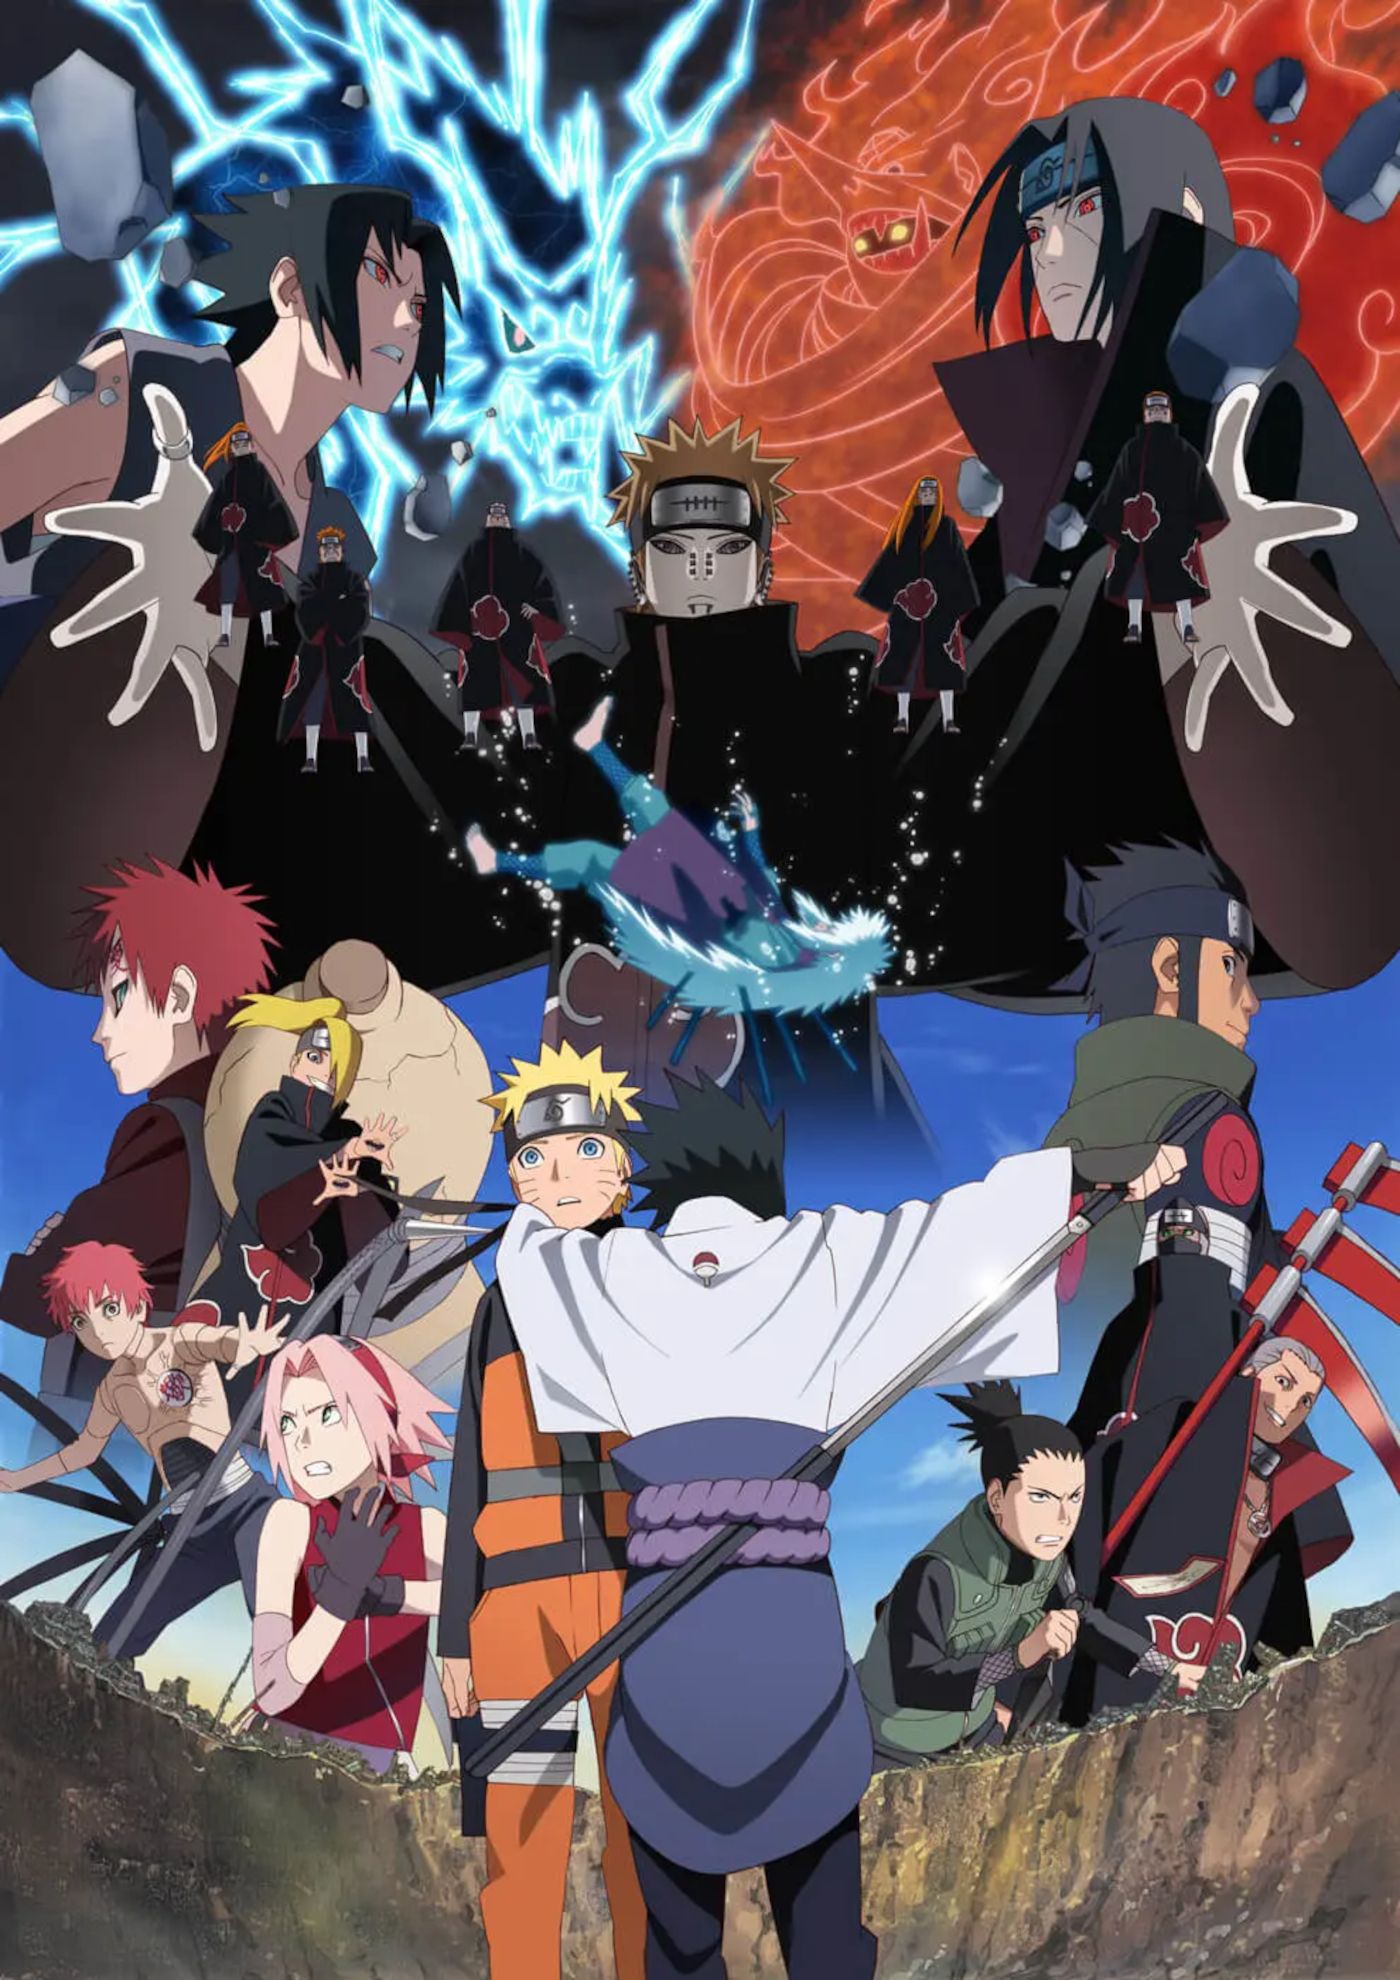 Image shows key moments and characters from the first half of Naruto Shippuden after the time skip, including Naruto and Sasuke's first reunion, Sasuke against Itachi, and Akatsuki.